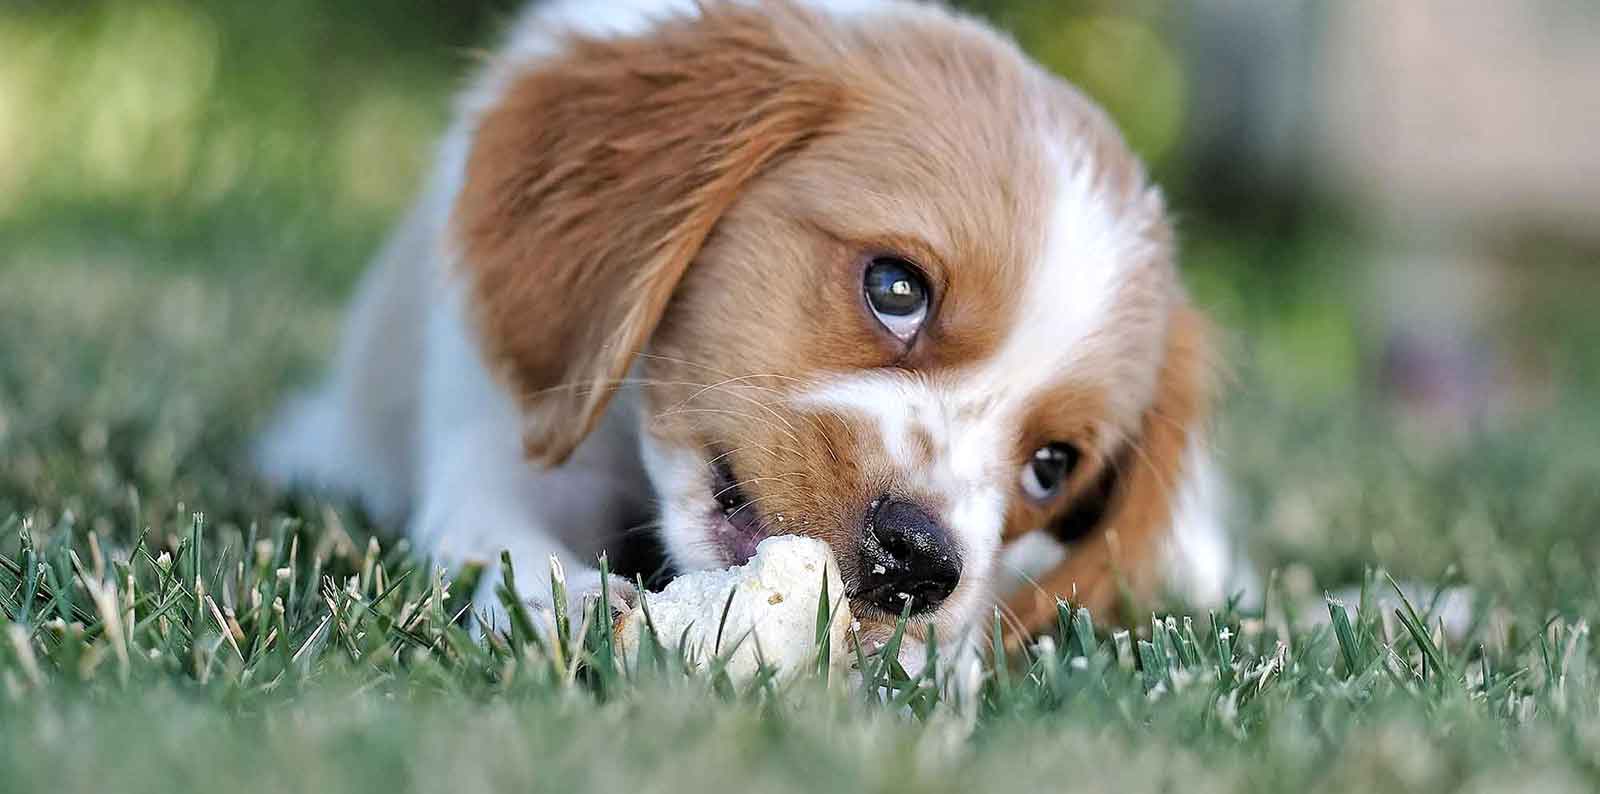 Why should I socialize my puppy?